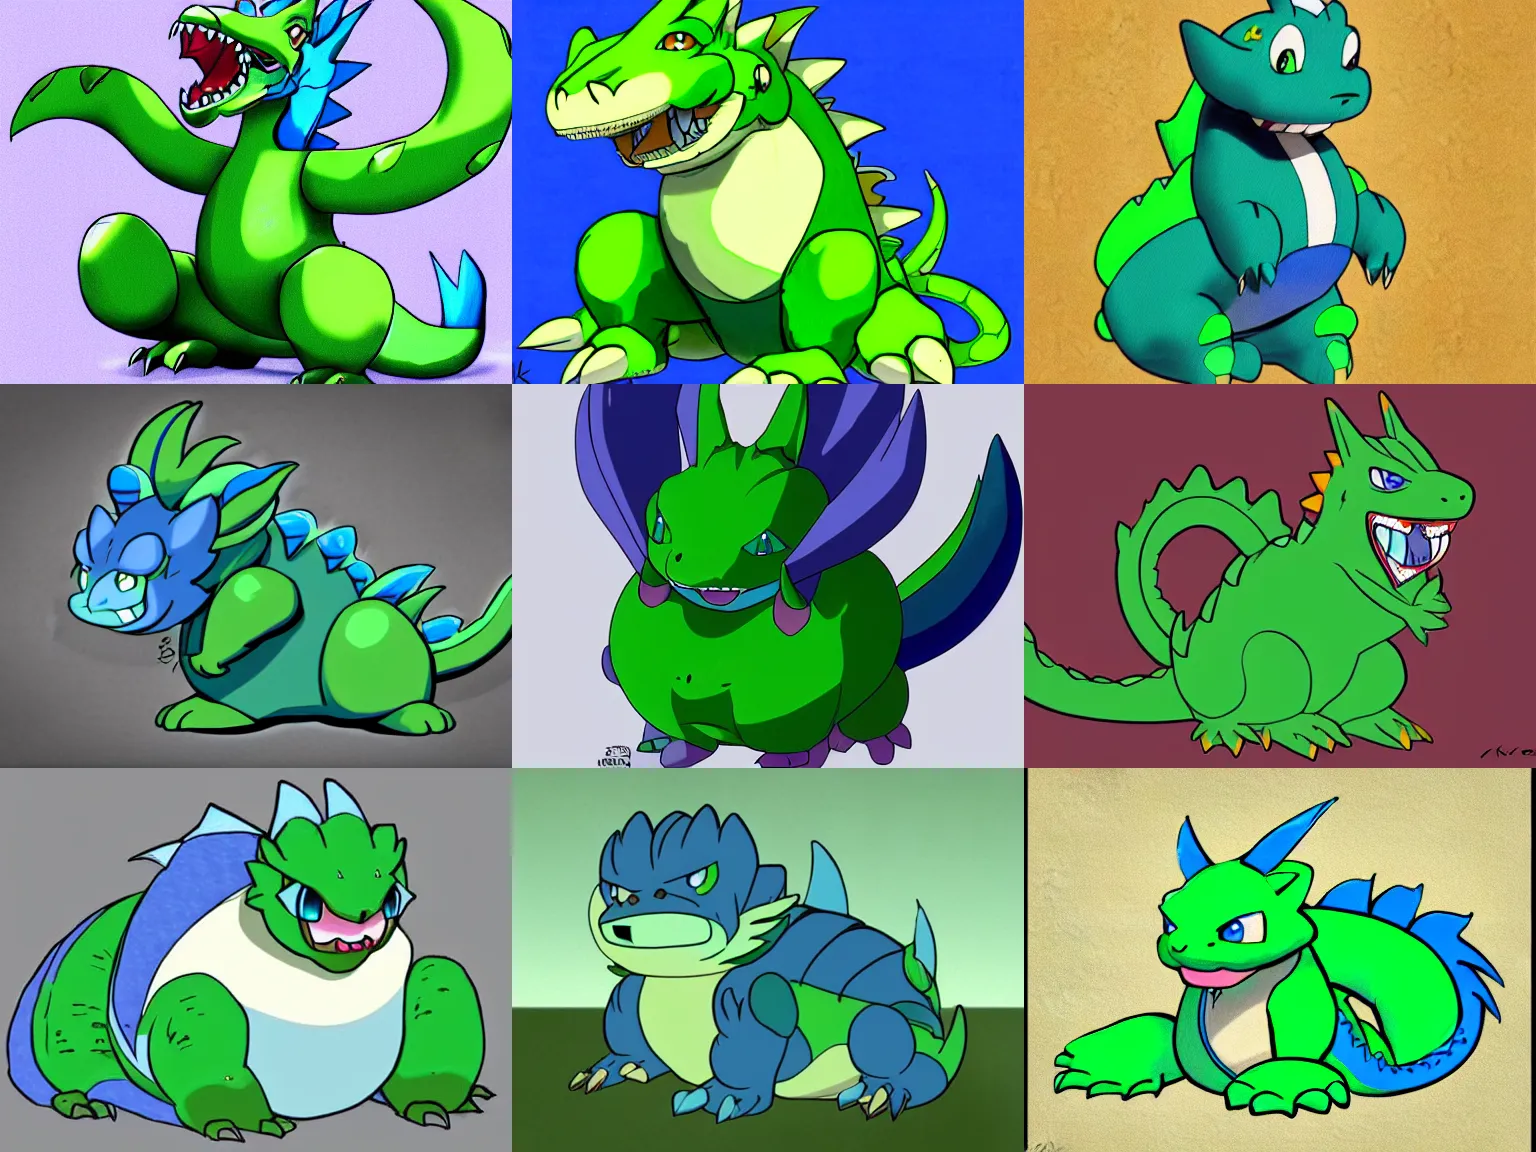 Prompt: a cartoon of a chubby blue and green chubby dragon, concept art by Ken Sugimori, featured on deviantart, furry art, chubby, furaffinity, deviantart hd, cel shading, commission for